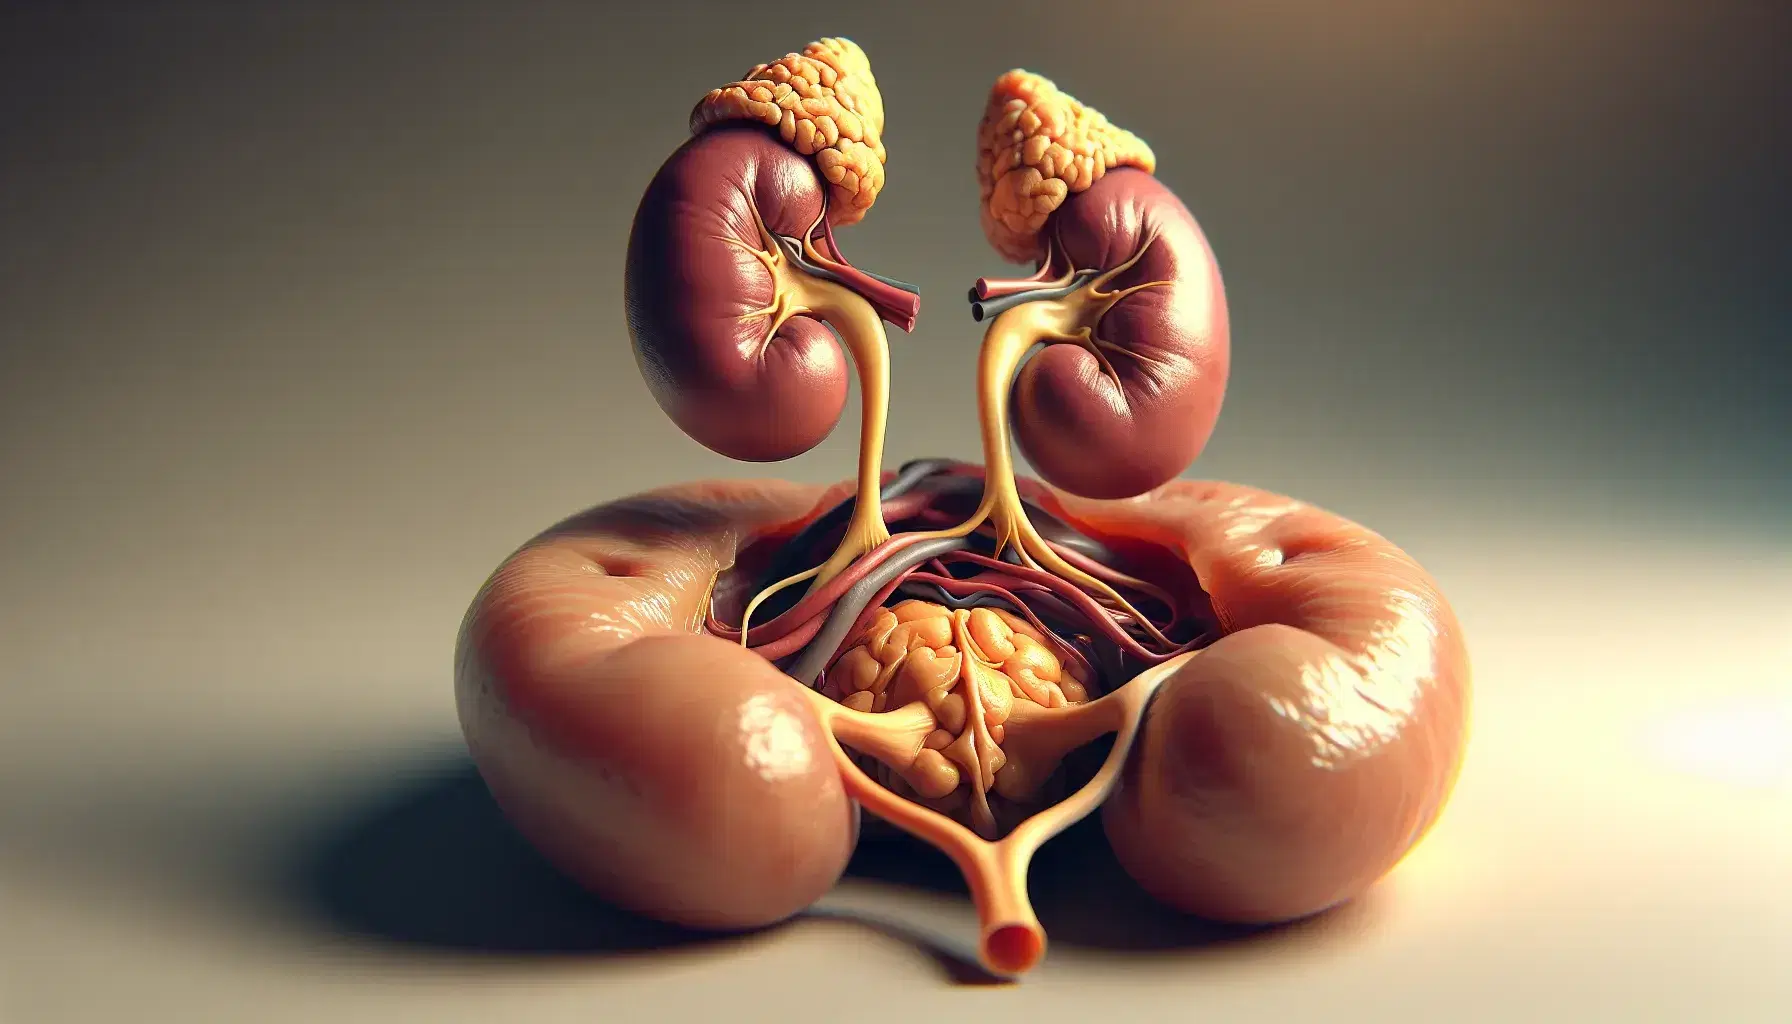 Close-up view of a human adrenal gland with a yellowish-tan cortex atop a reddish-brown kidney, highlighting anatomical details and structure.